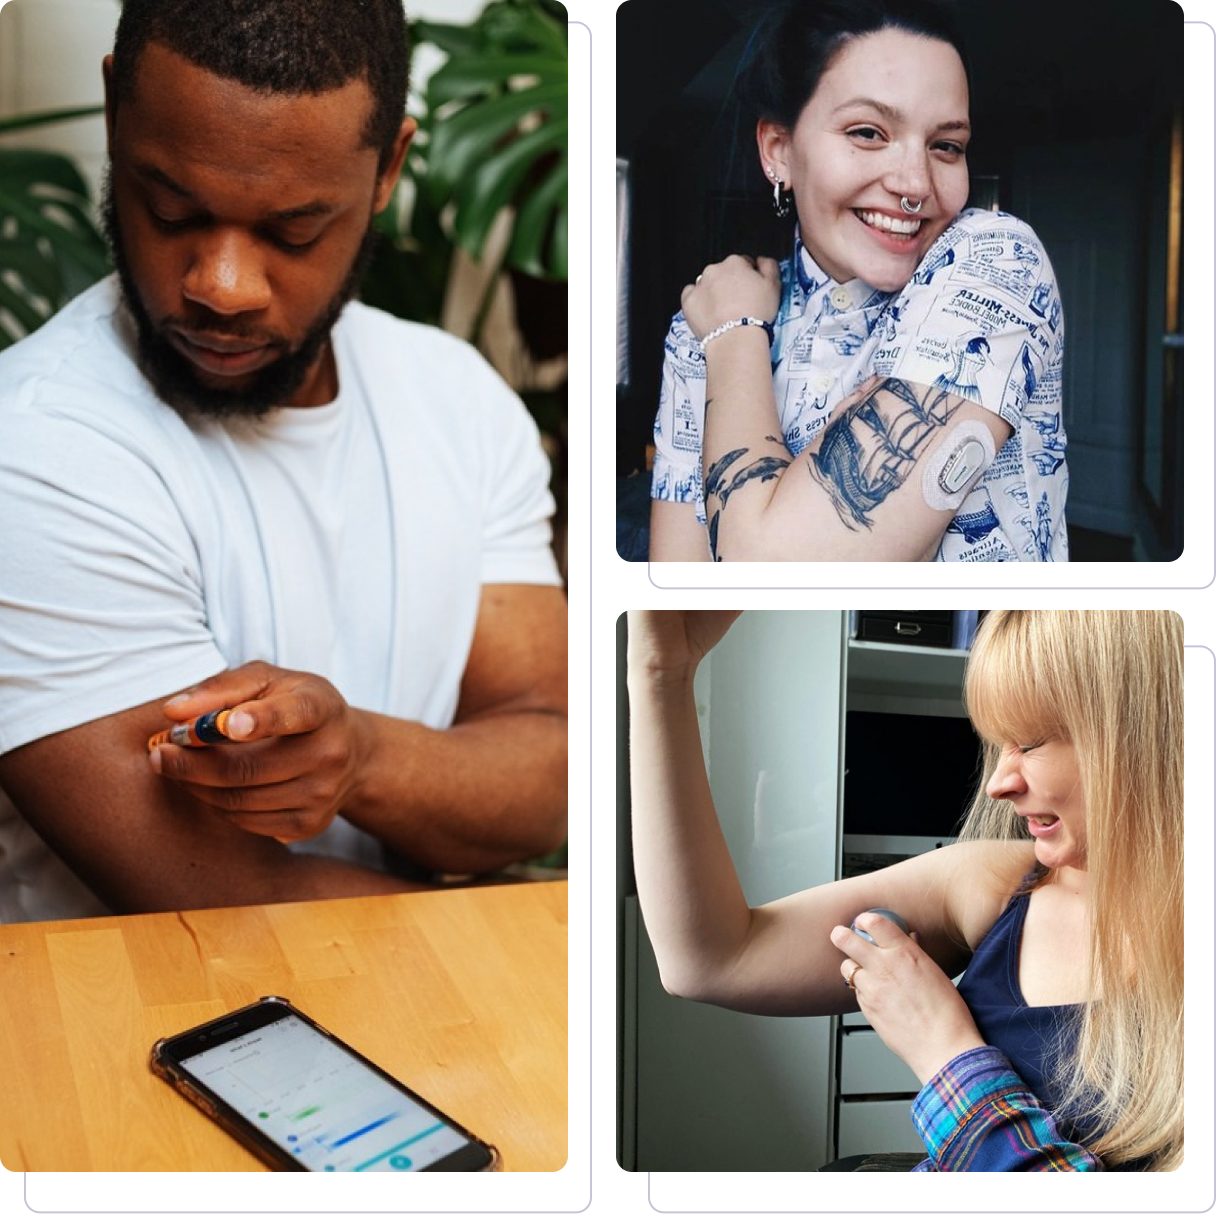 Collage of three people applying diabetes monitoring devices on different body parts, each smiling or focused.